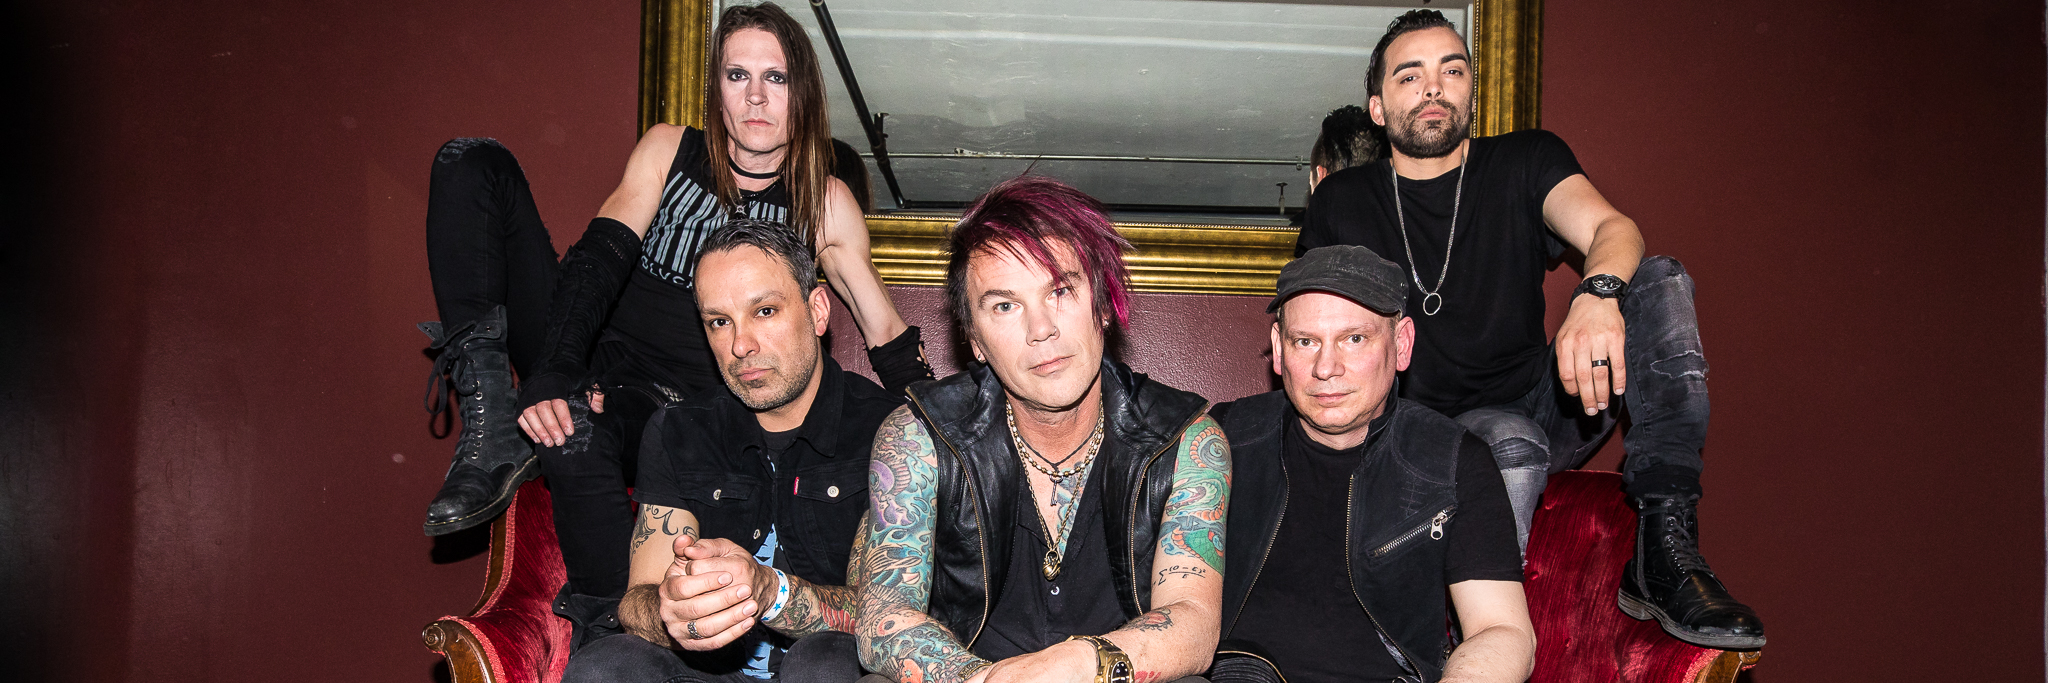 Stabbing Westward Performs To A Packed House At Philly’s Iconic Trocadero Theatre